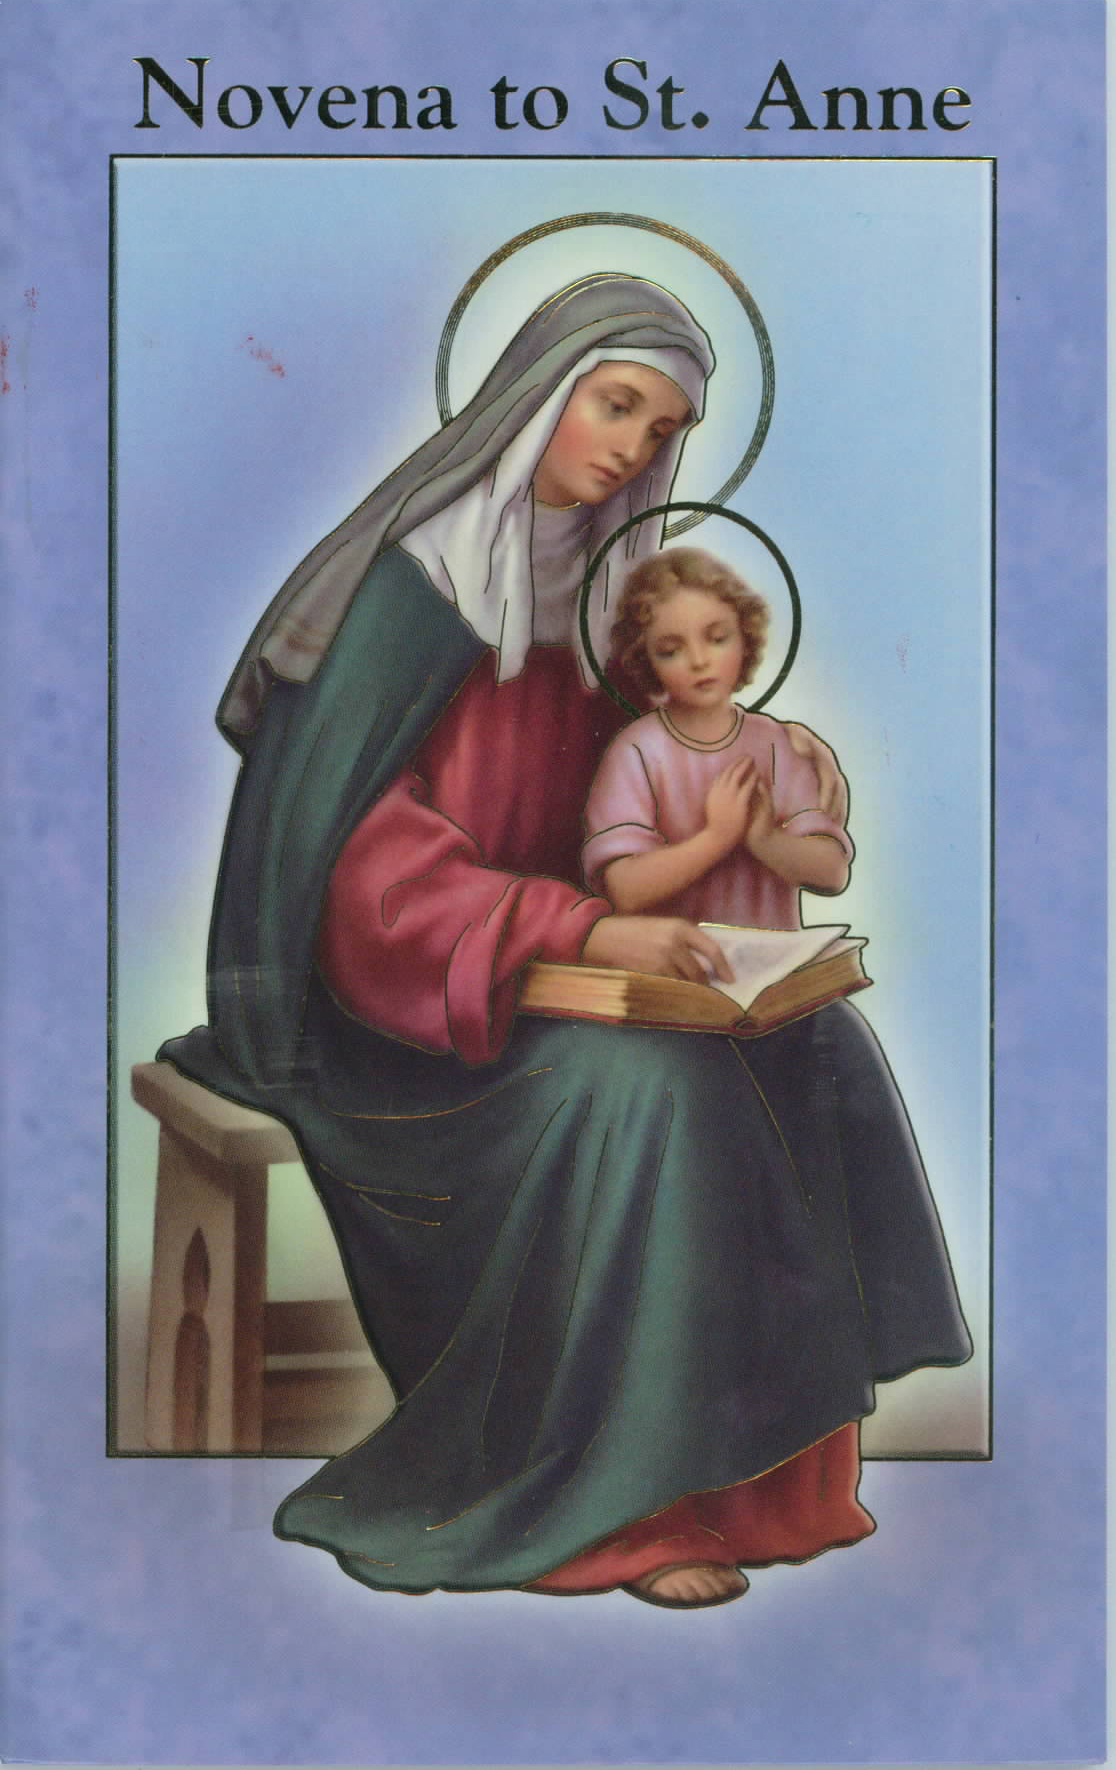 Novena to St. Anne  & Prayers Book 12-2432-610 is 3.75" x 5-7/8" and 24 pages beautifully illustrated with Italian Fratelli-Bonella Artwork and original text by Daniel A. Lord, S.J.